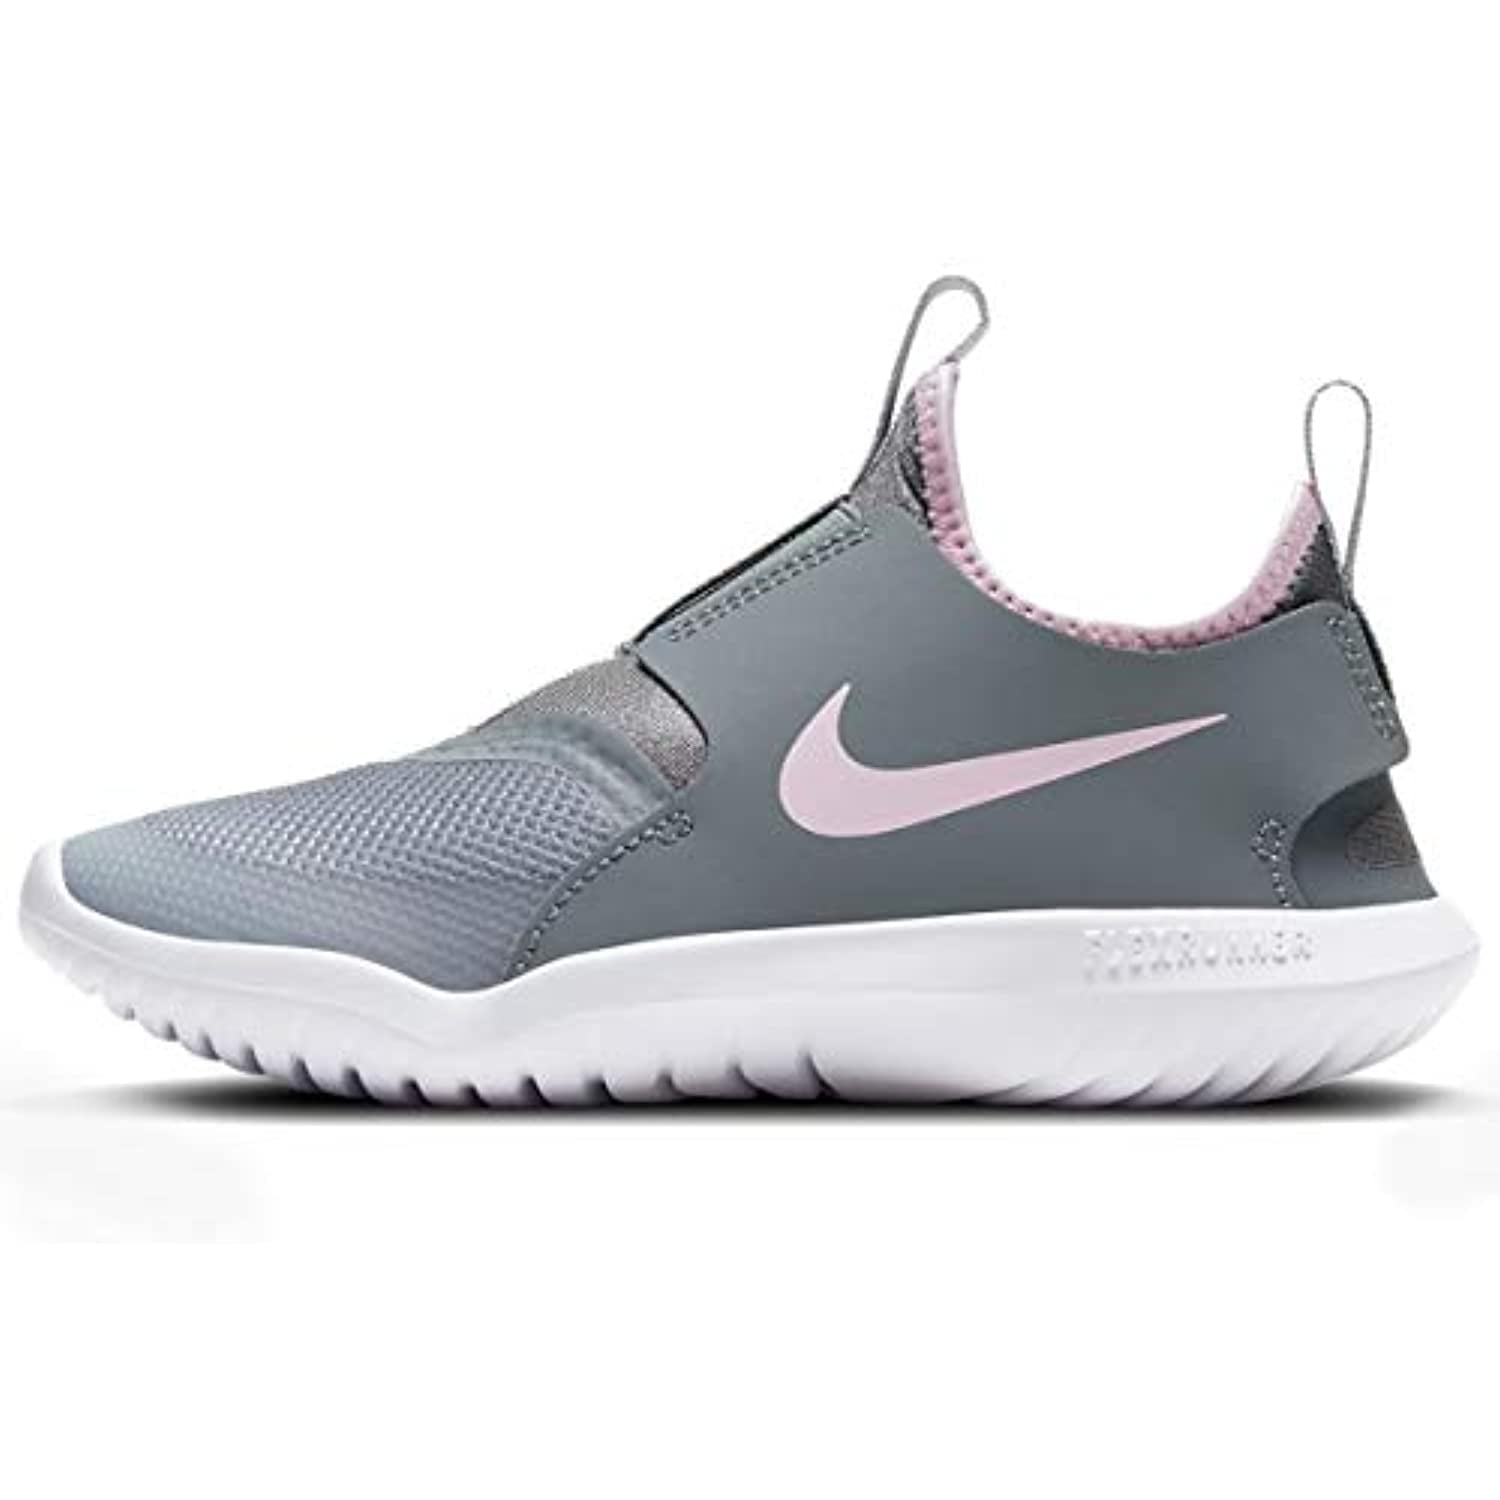 Nike Flex Runner (ps) Running Casual Little Kids Shoes At4663-018 Size ...